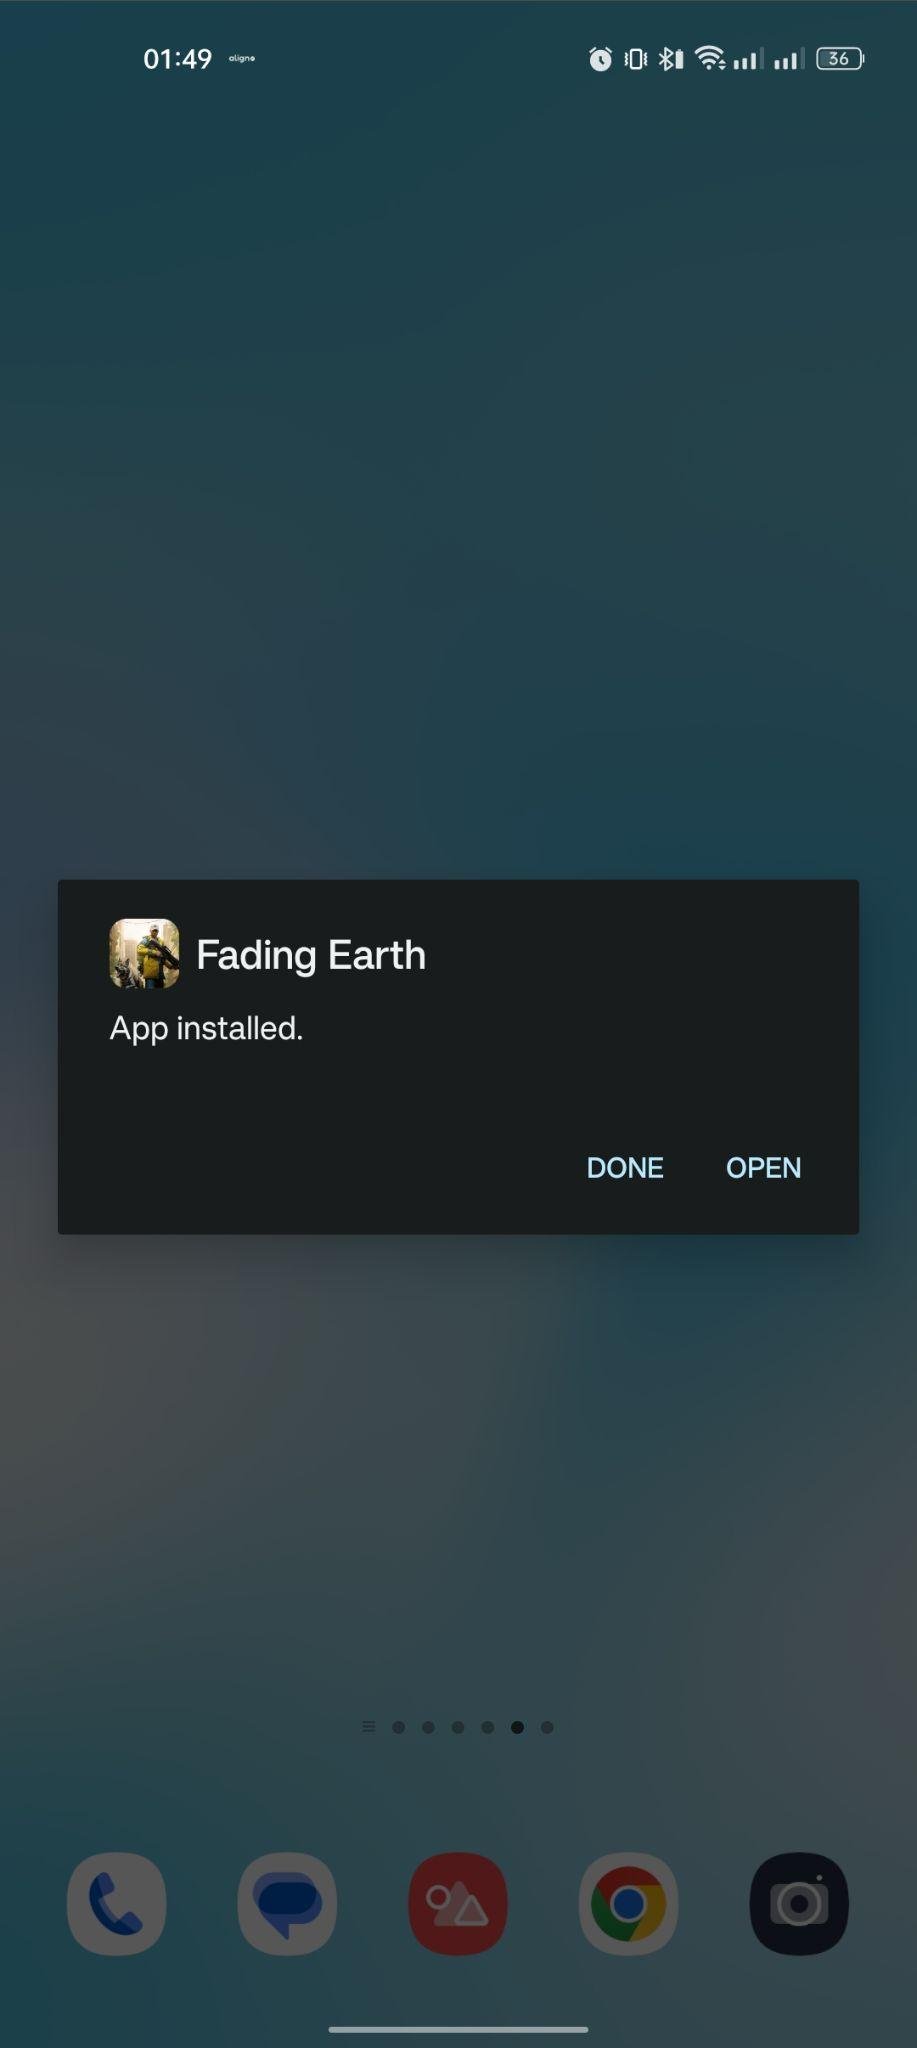 Fading Earth apk installed